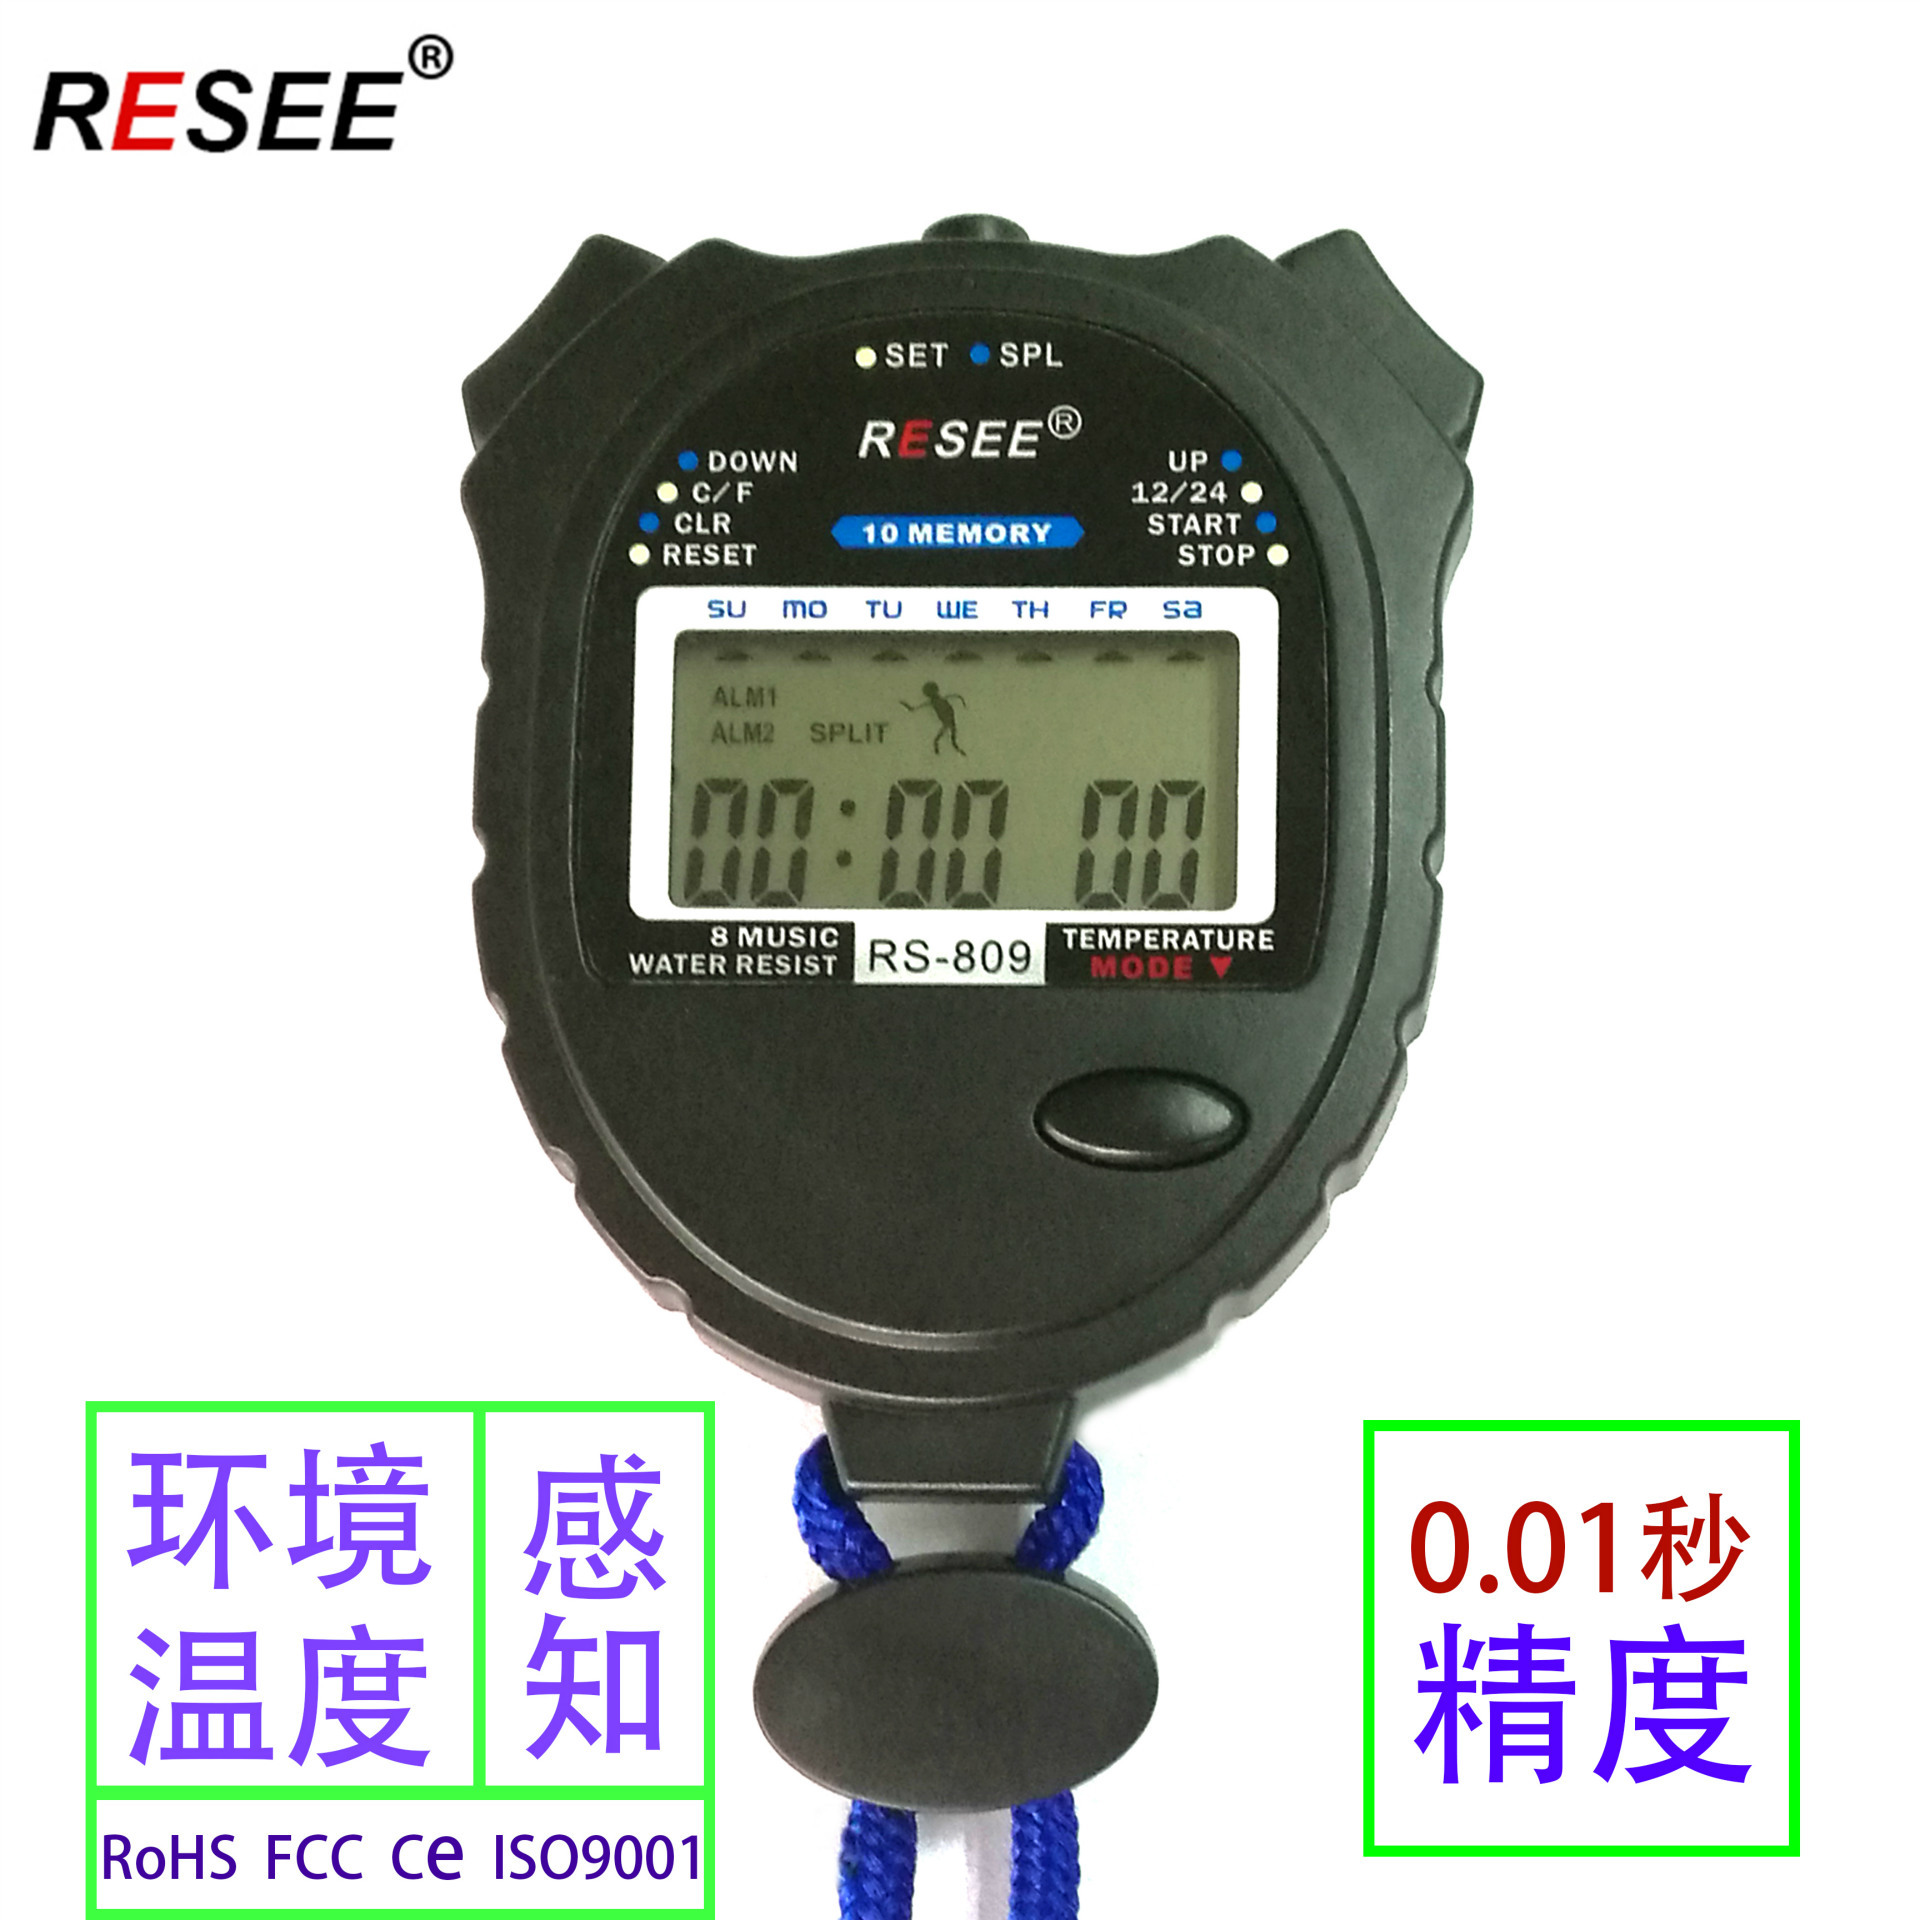 Sports stopwatch RS-809